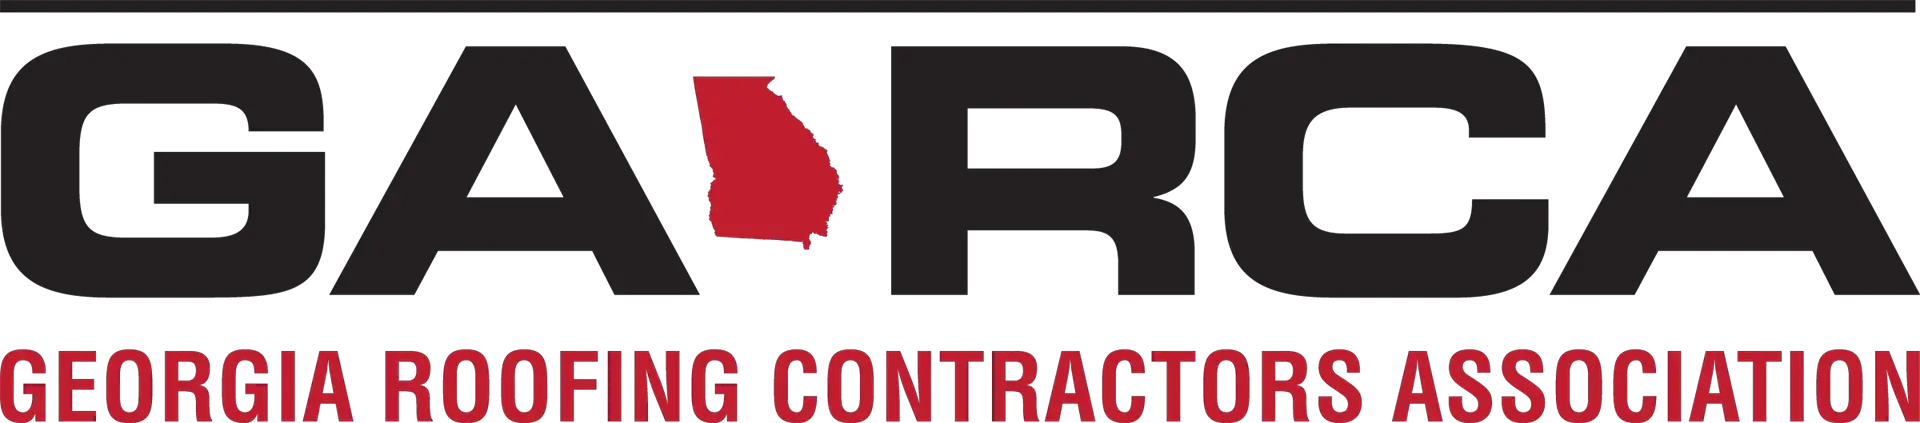 Georgia Roofing Contractors Association roofing company in Georgia